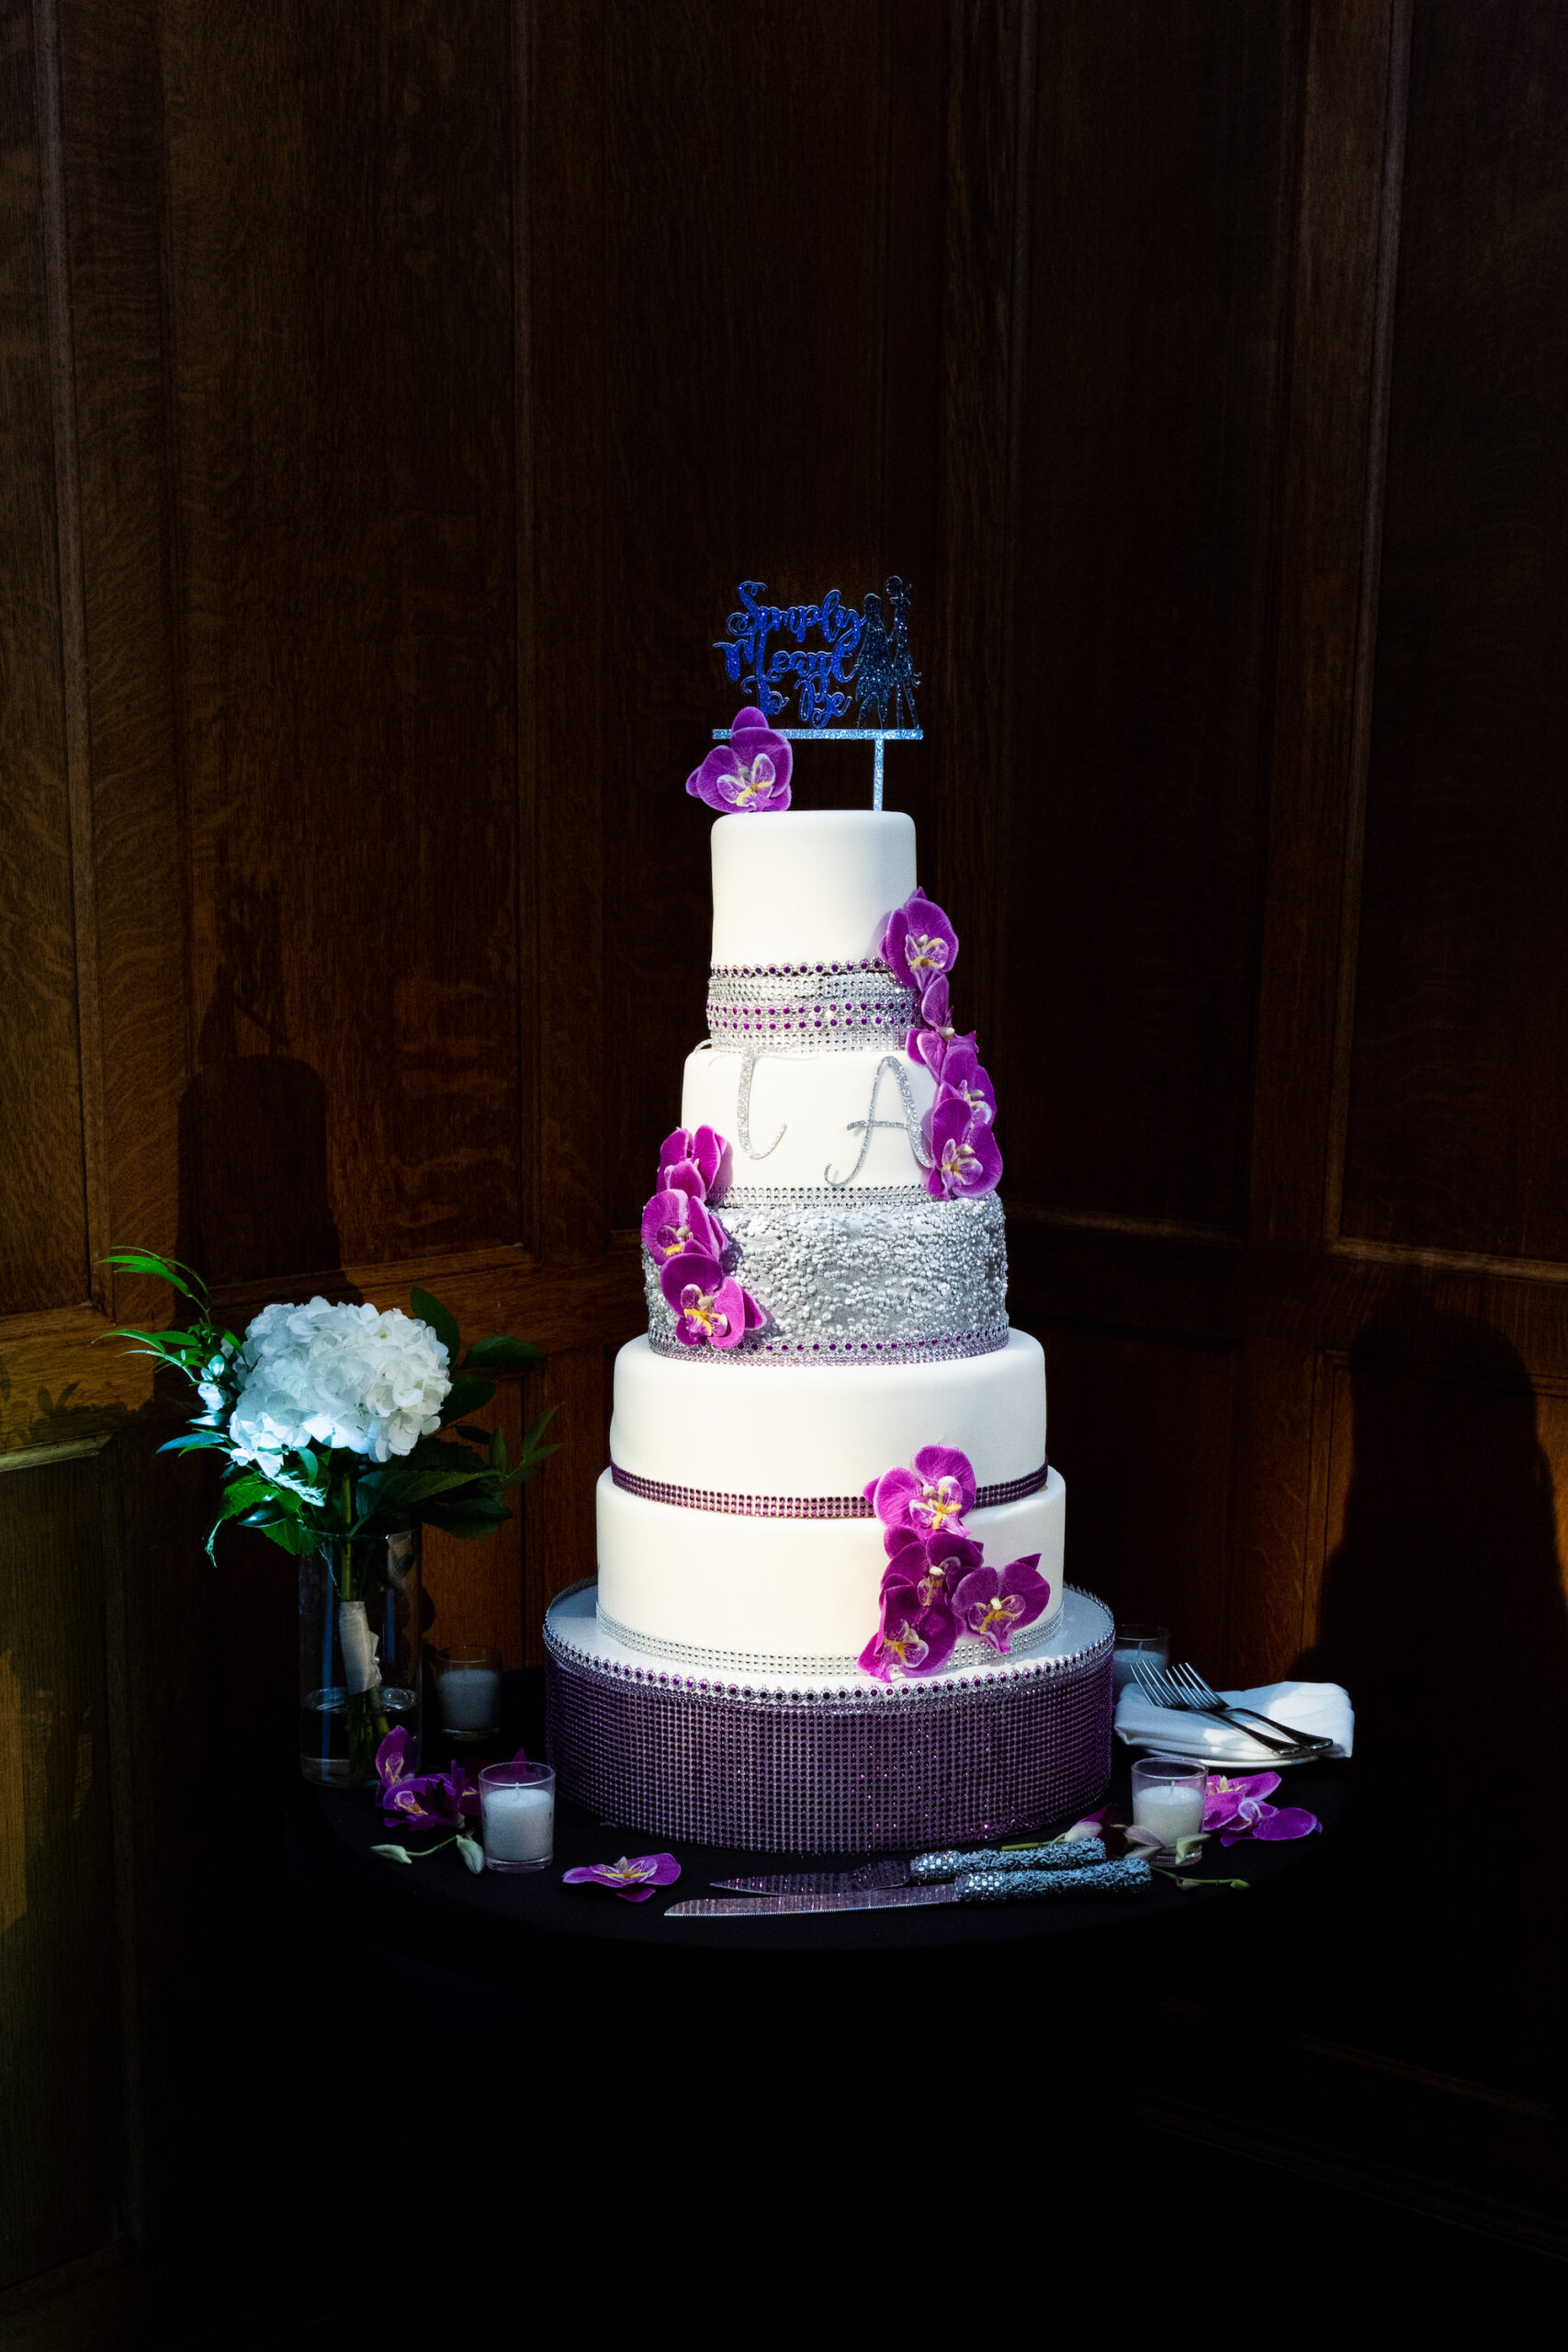 5 Tier Round White Wedding Cake with Purple Orchid Flowers and Silver Rhinestones